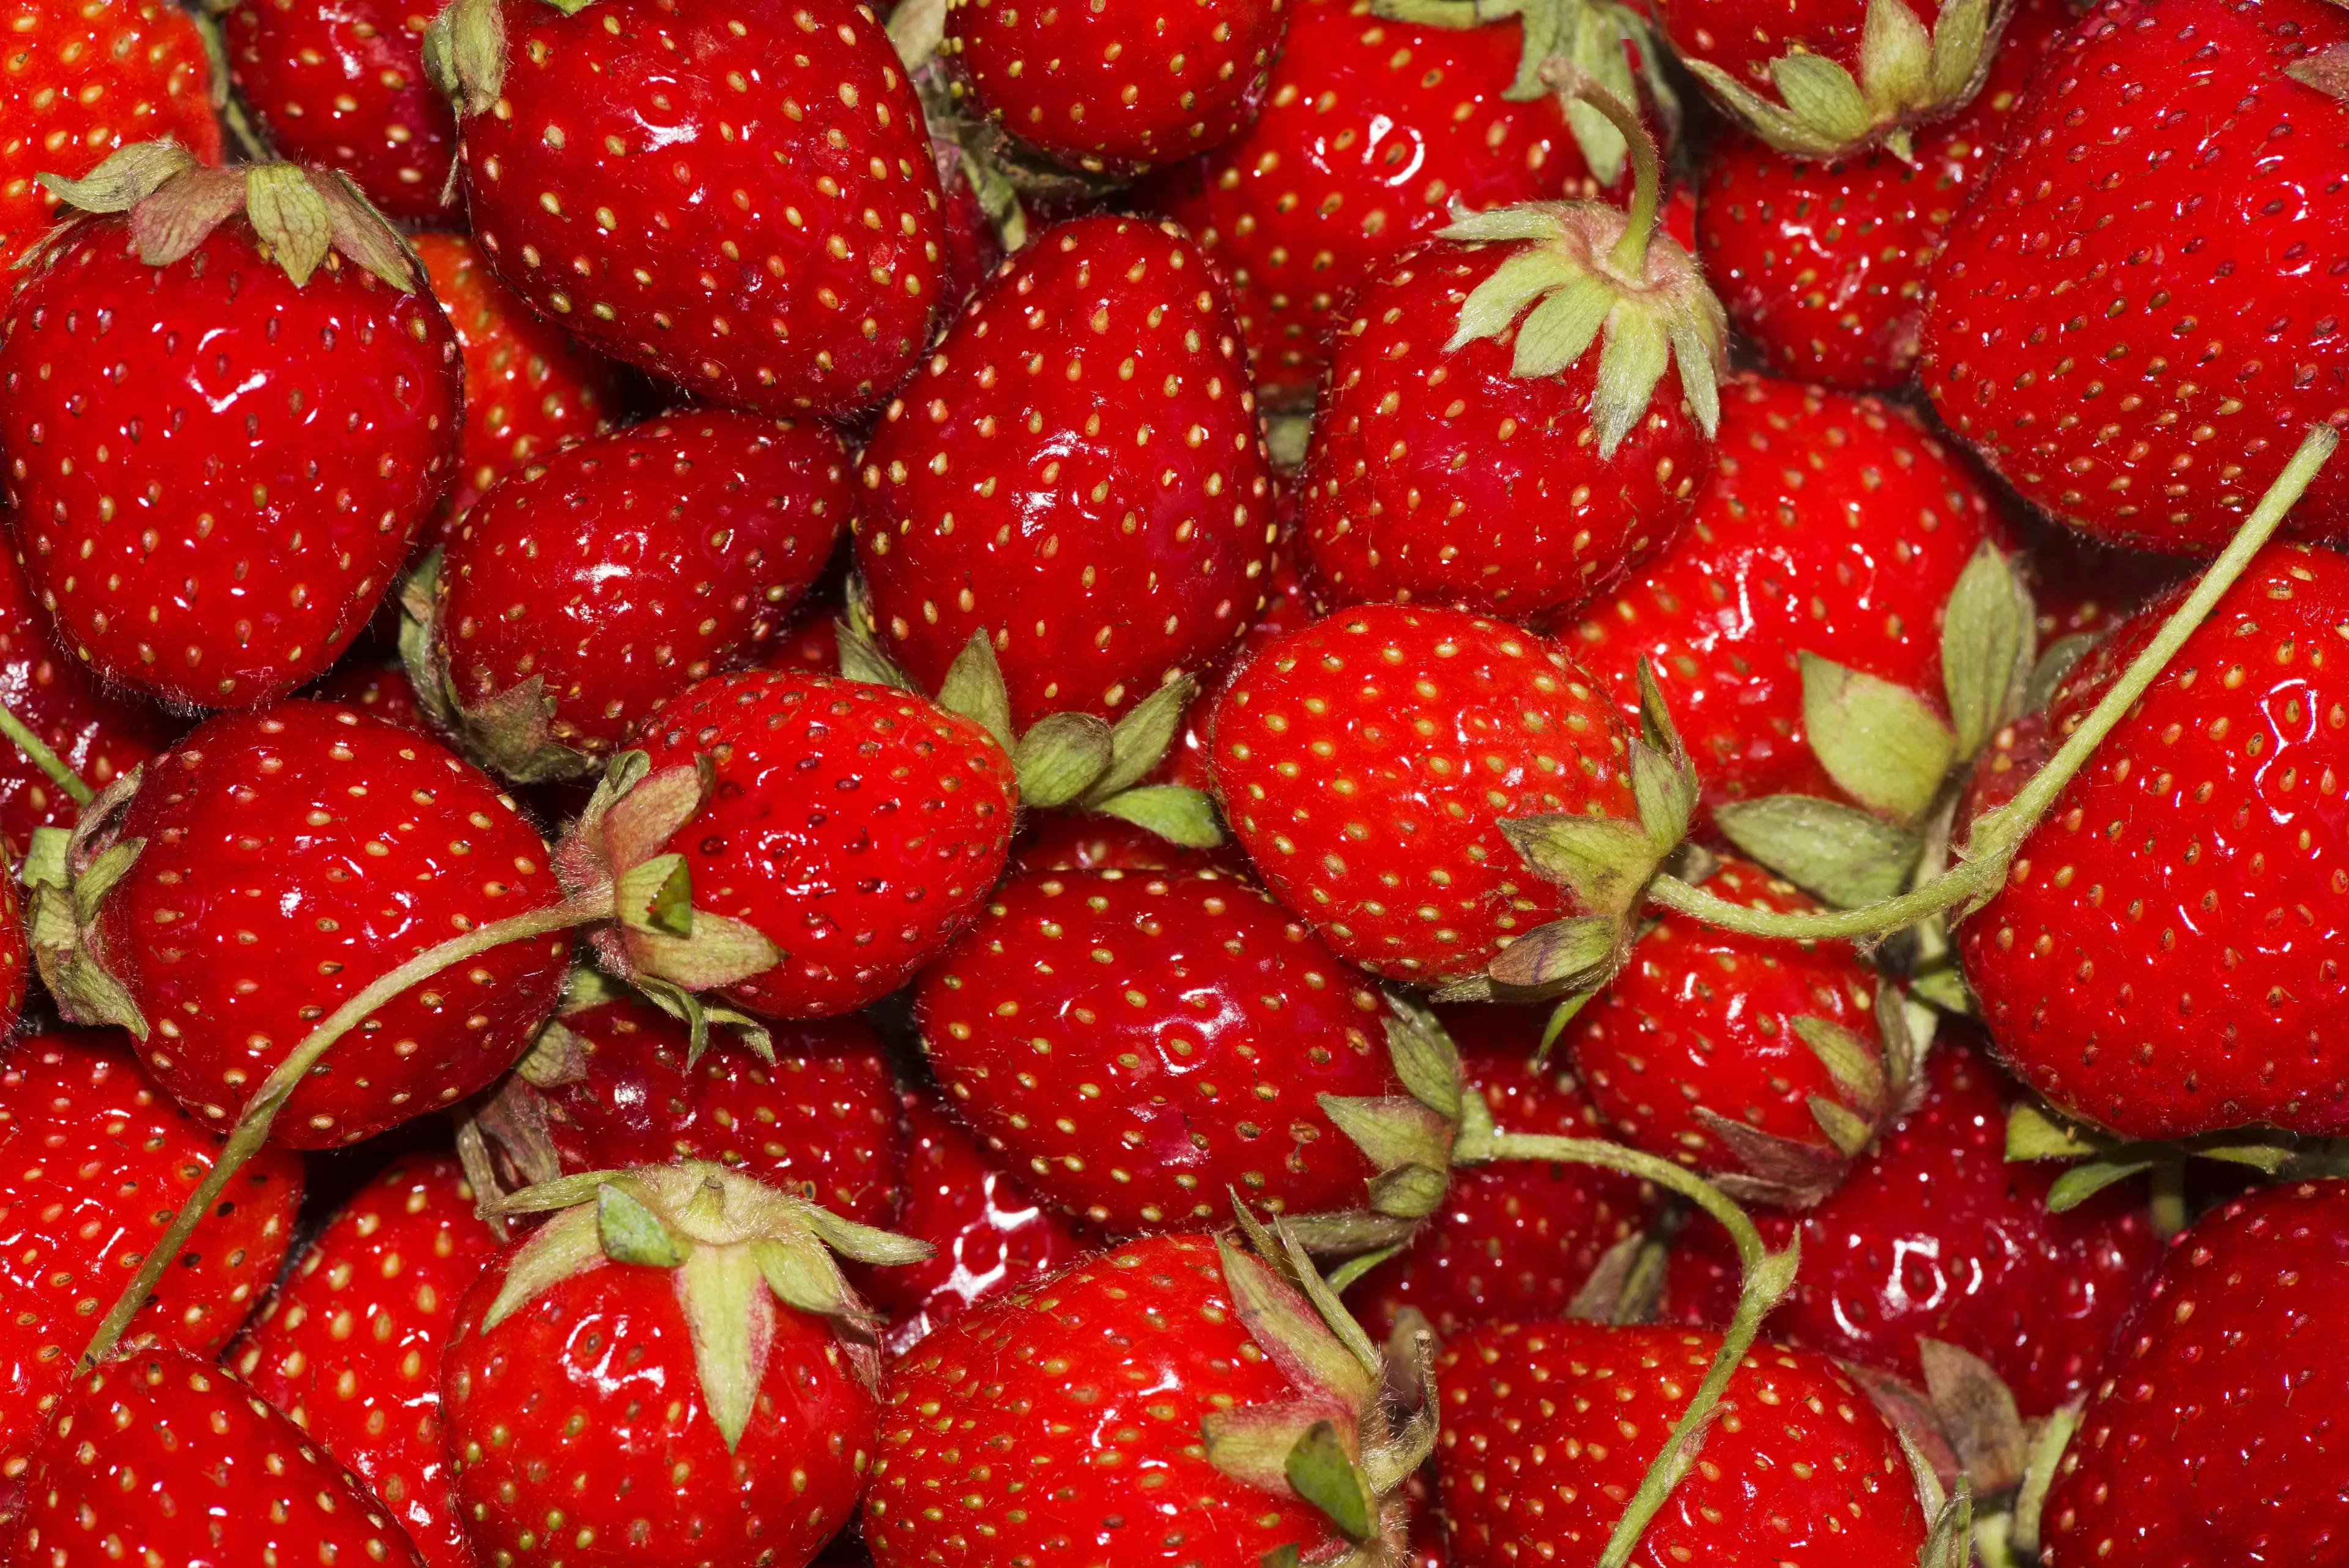 There were over 100 reports of sewing needles being found inside strawberries.